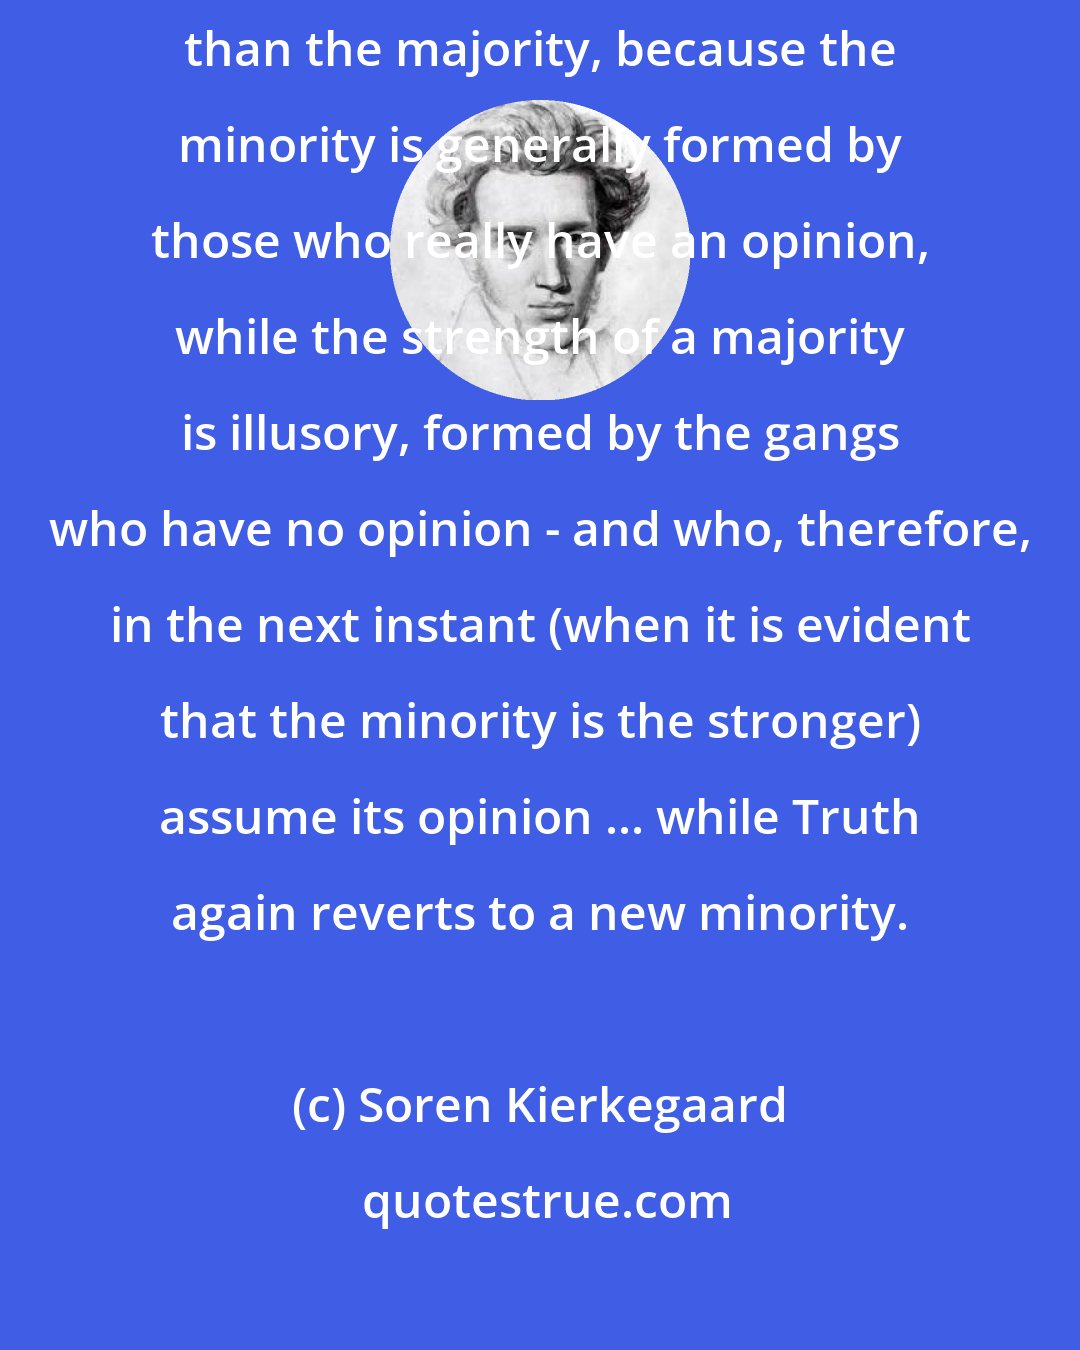 Soren Kierkegaard: Truth always rests with the minority, and the minority is always stronger than the majority, because the minority is generally formed by those who really have an opinion, while the strength of a majority is illusory, formed by the gangs who have no opinion - and who, therefore, in the next instant (when it is evident that the minority is the stronger) assume its opinion ... while Truth again reverts to a new minority.